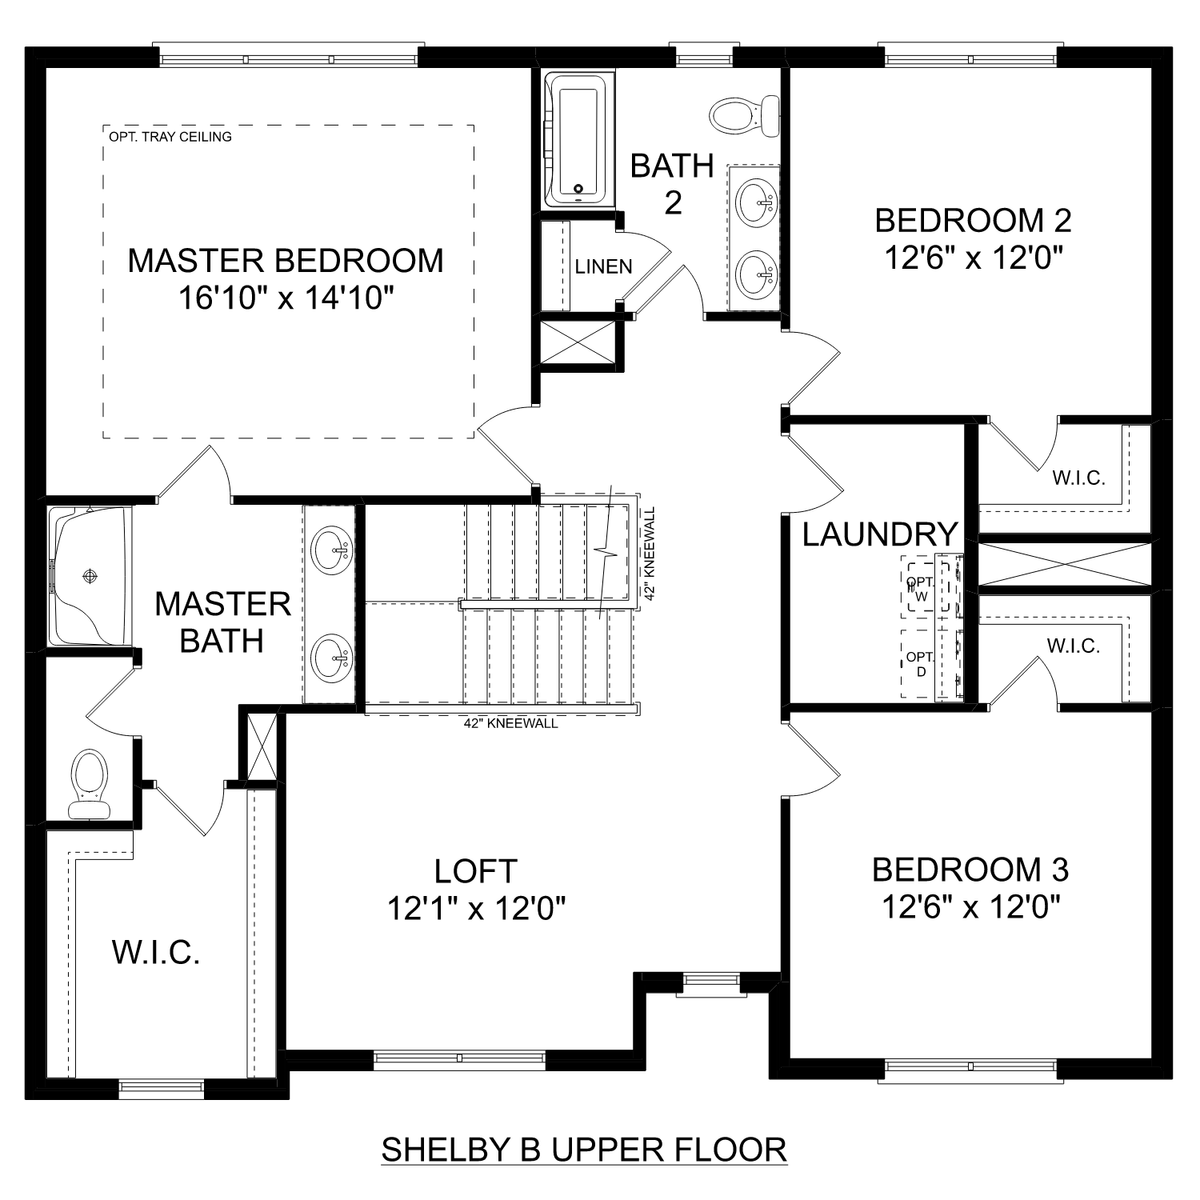 2 - The Shelby B floor plan layout for 111 Wilcot Road in Davidson Homes' Walker's Hill community.